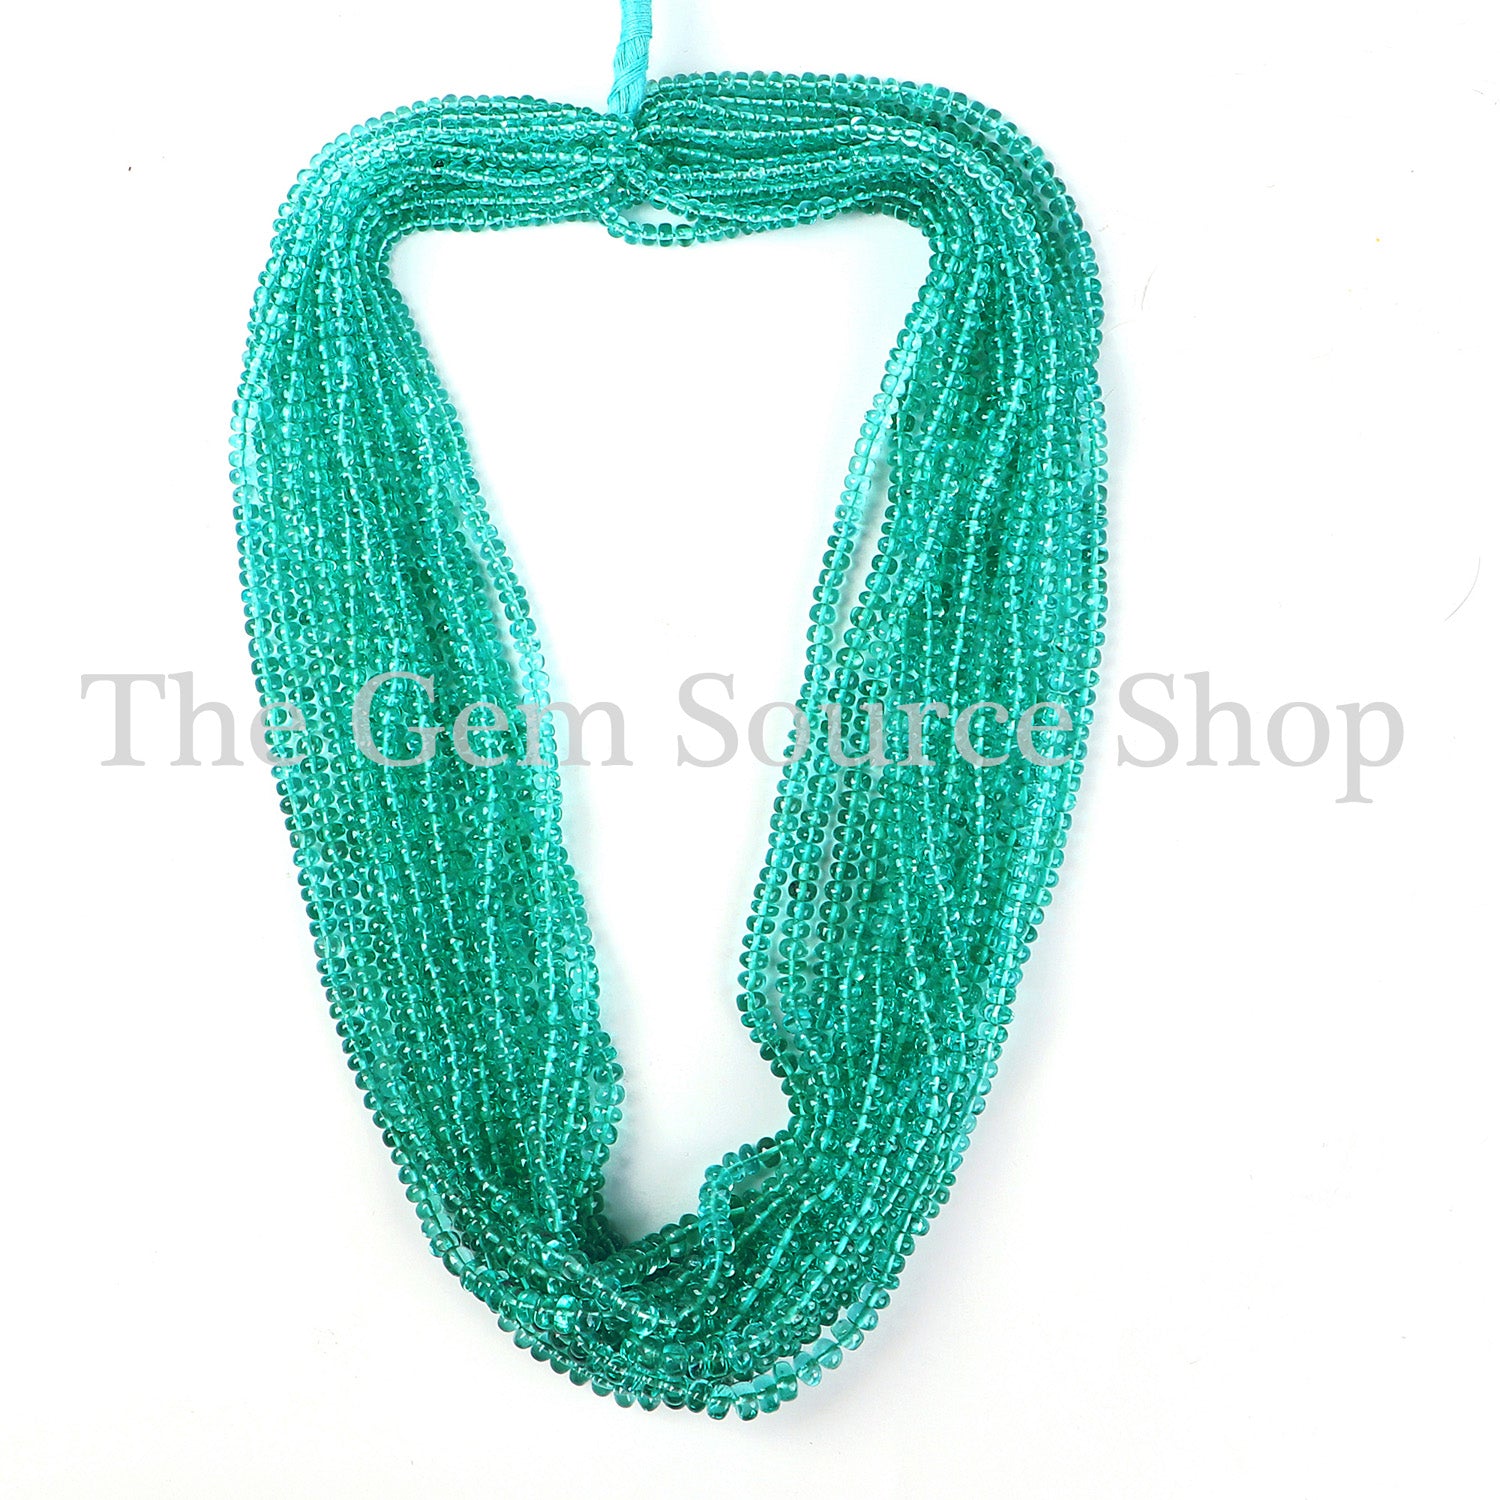 Apatite Beads, Apatite Smooth Rondelle Beads, Plain Apatite Beads, Apatite Gemstone Beads